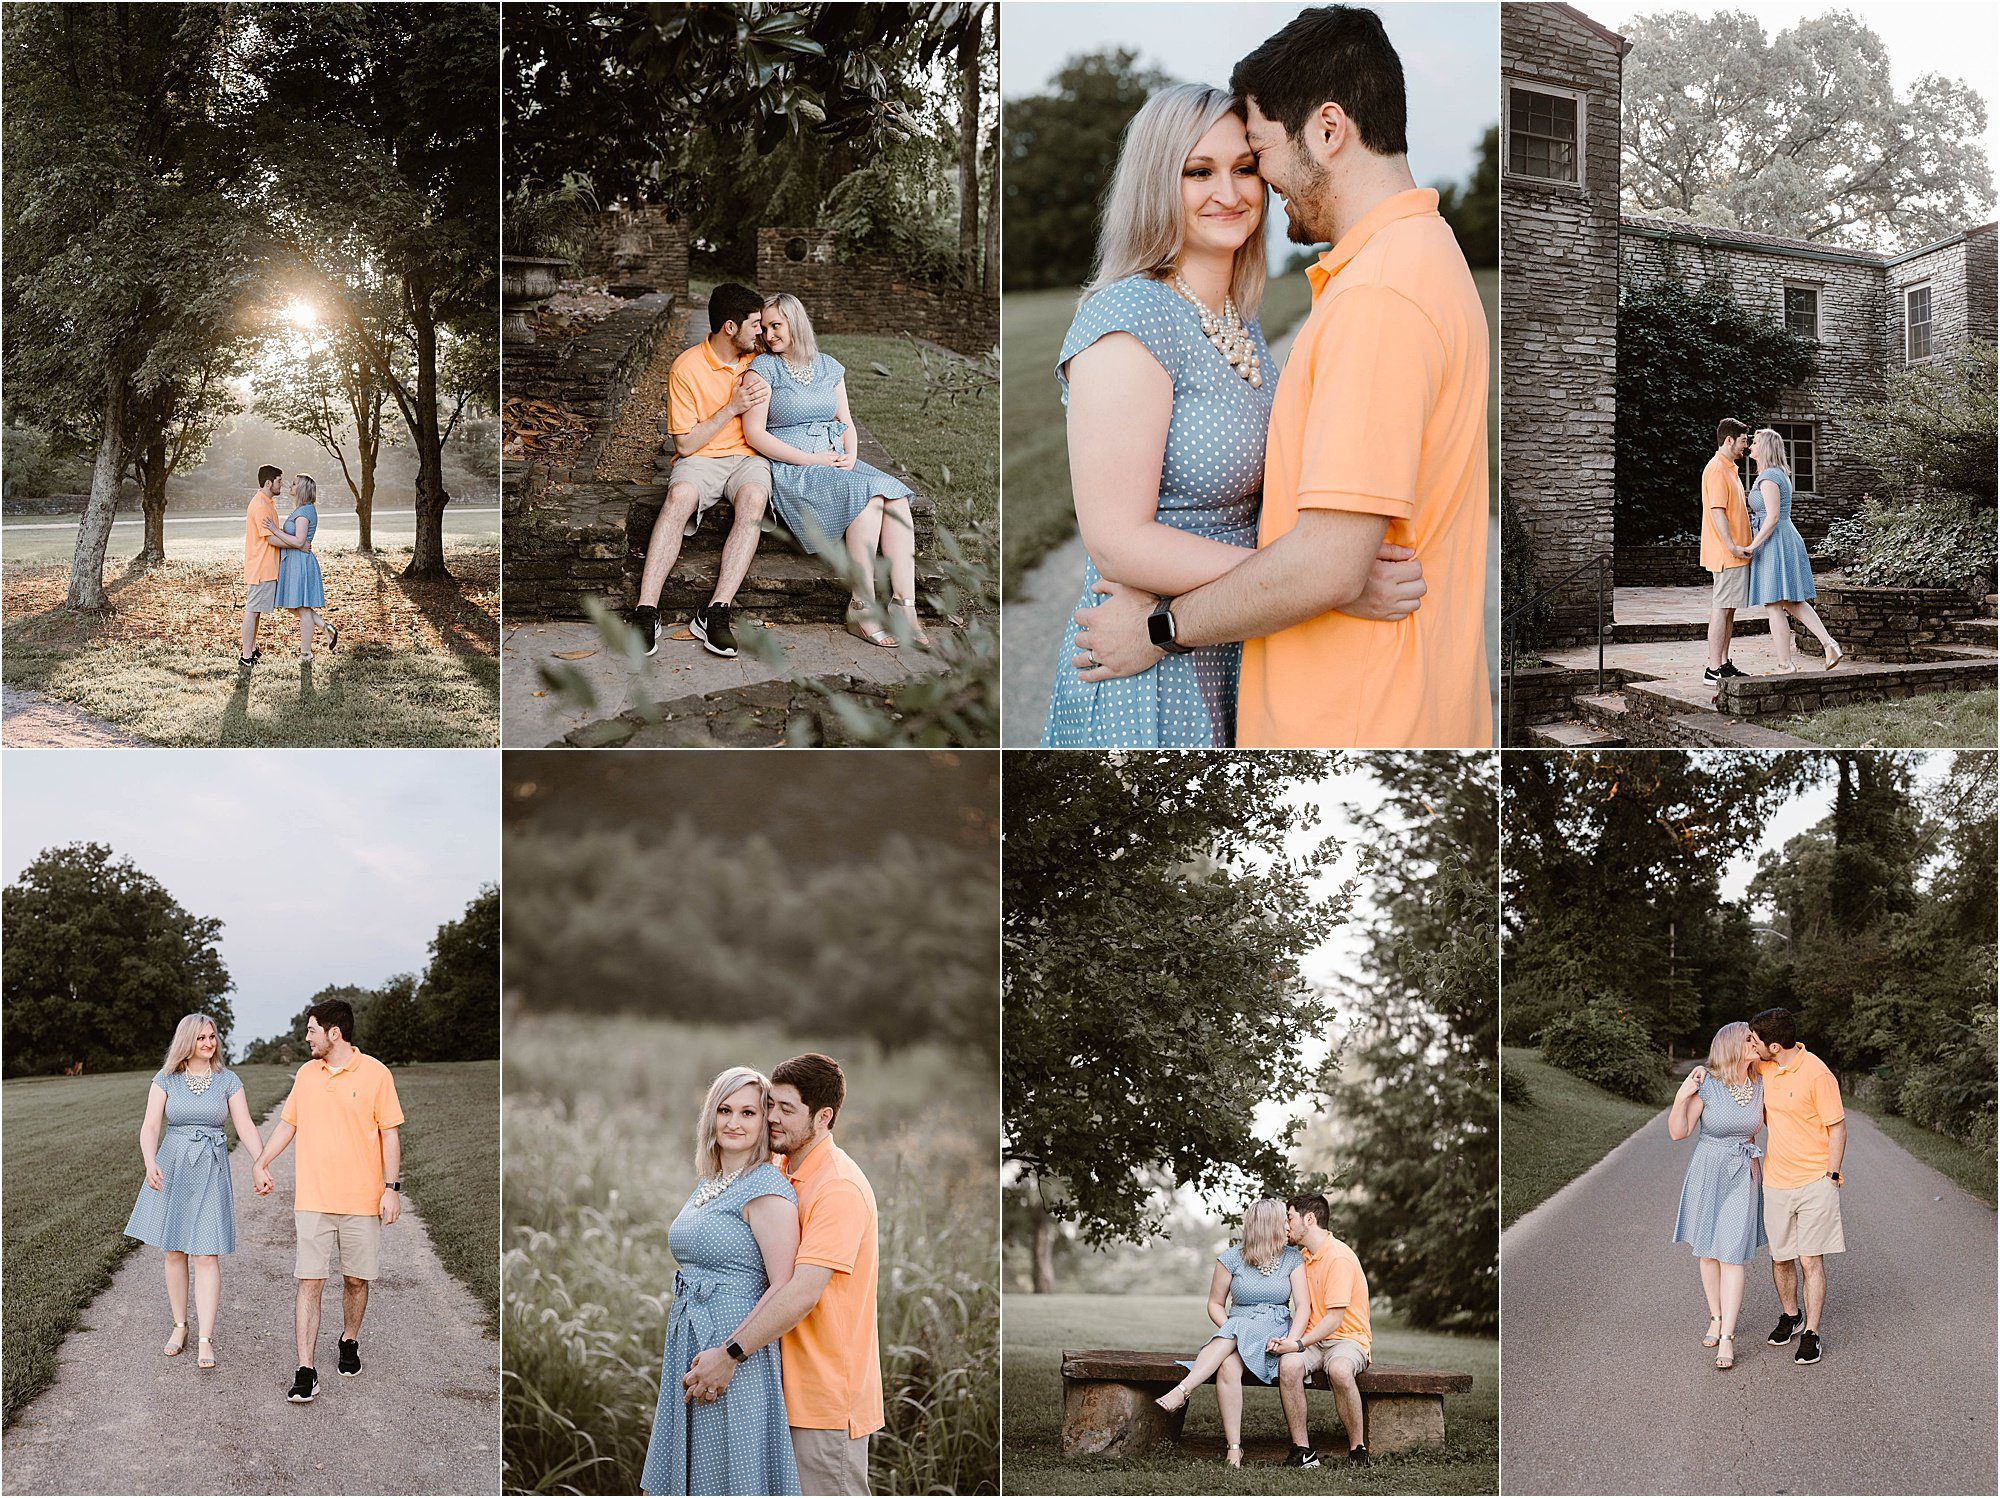 Sunrise Engagement Session at the Knoxville Botanical Gardens